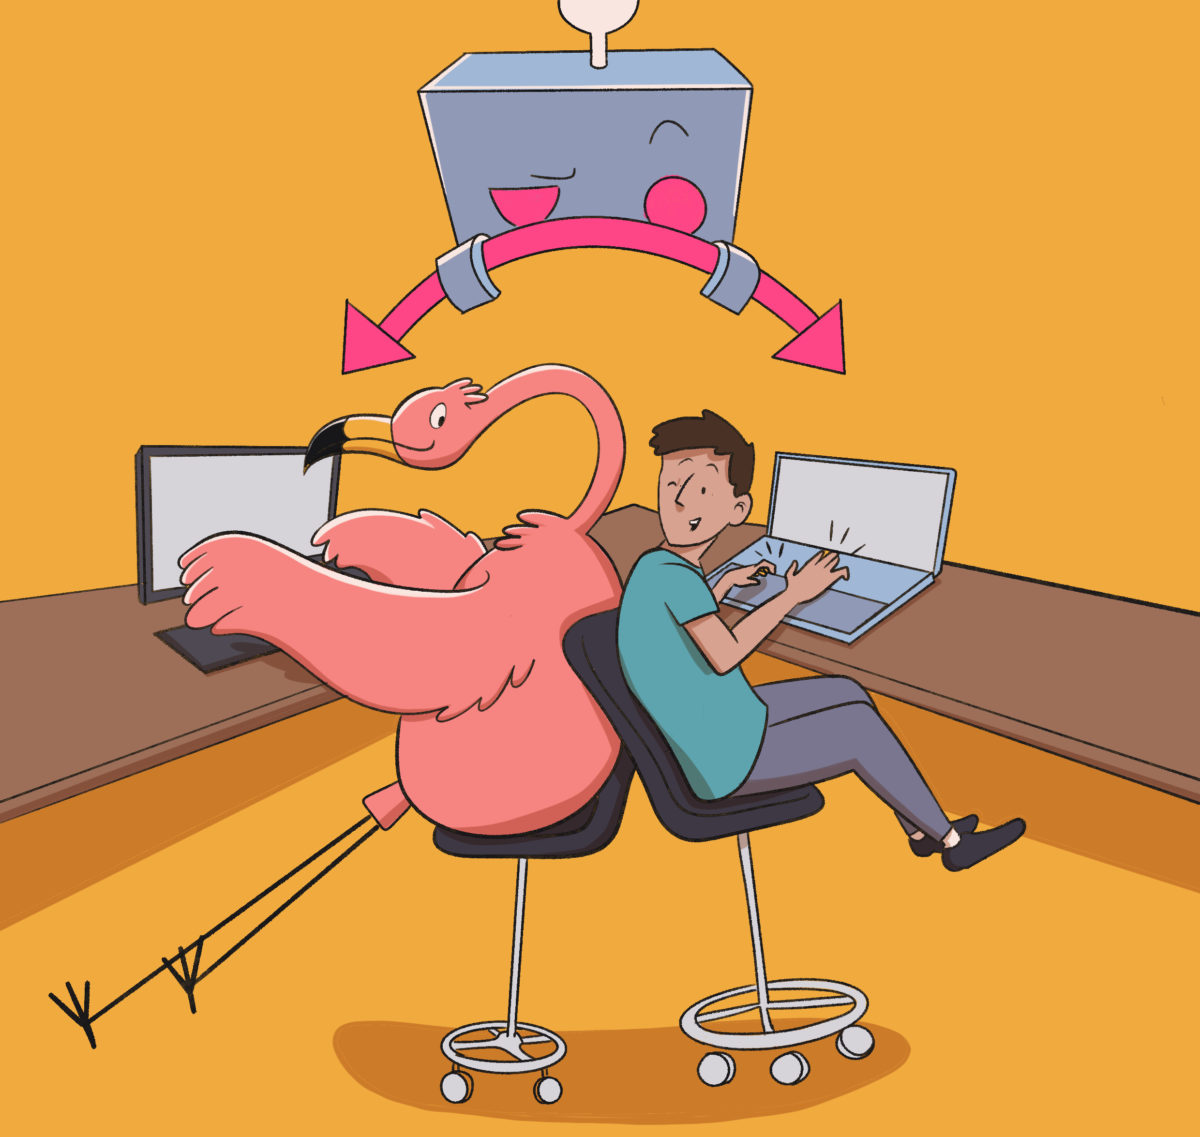 Two animated characters engaged in a tug of war with an oversized magnet over a computer, possibly symbolizing a struggle for attention or resources.